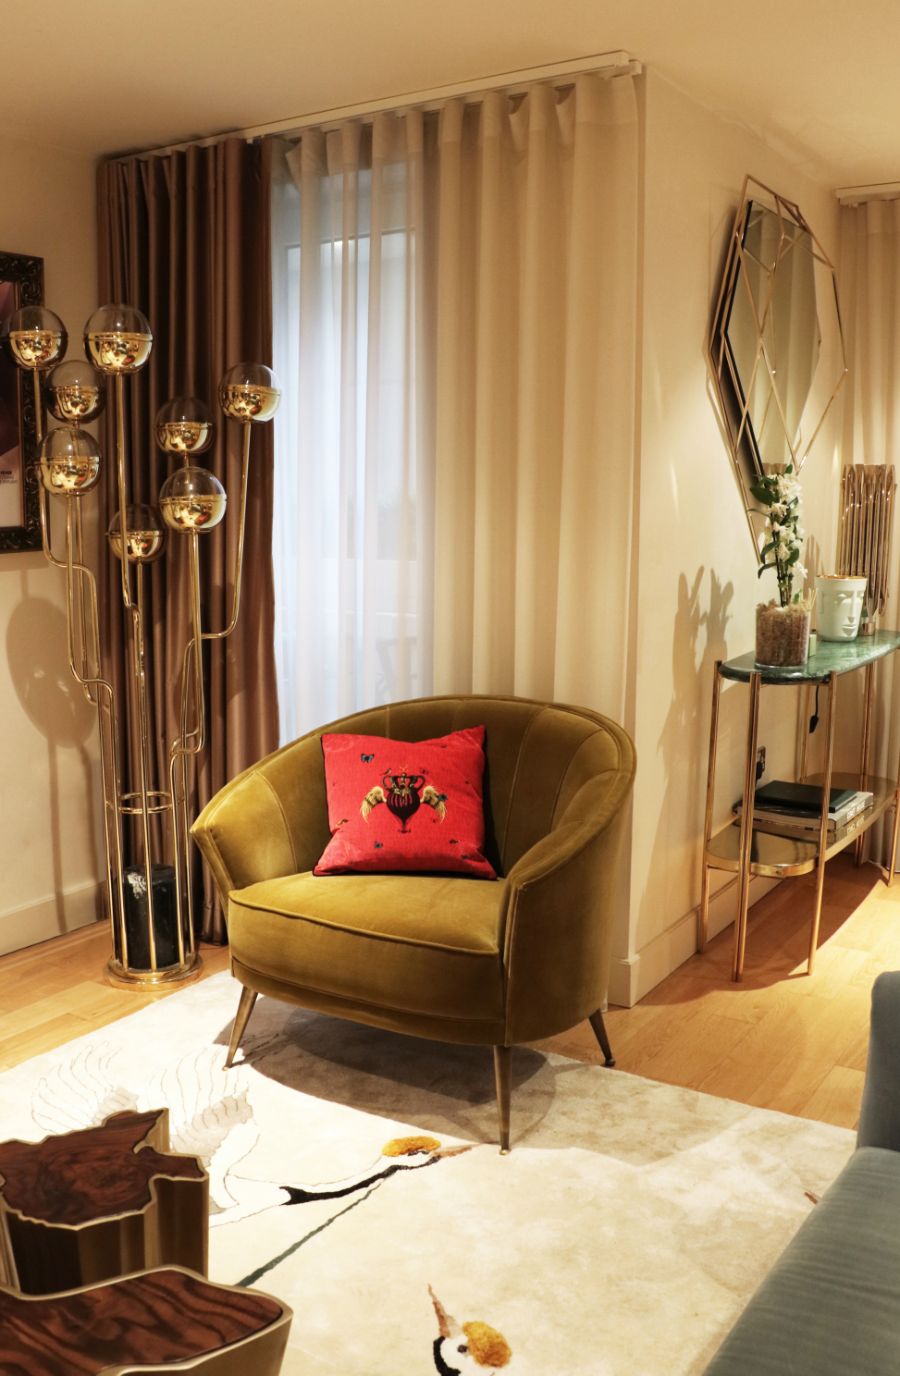 Covet London - A High-End Design Experience in a Timeless City